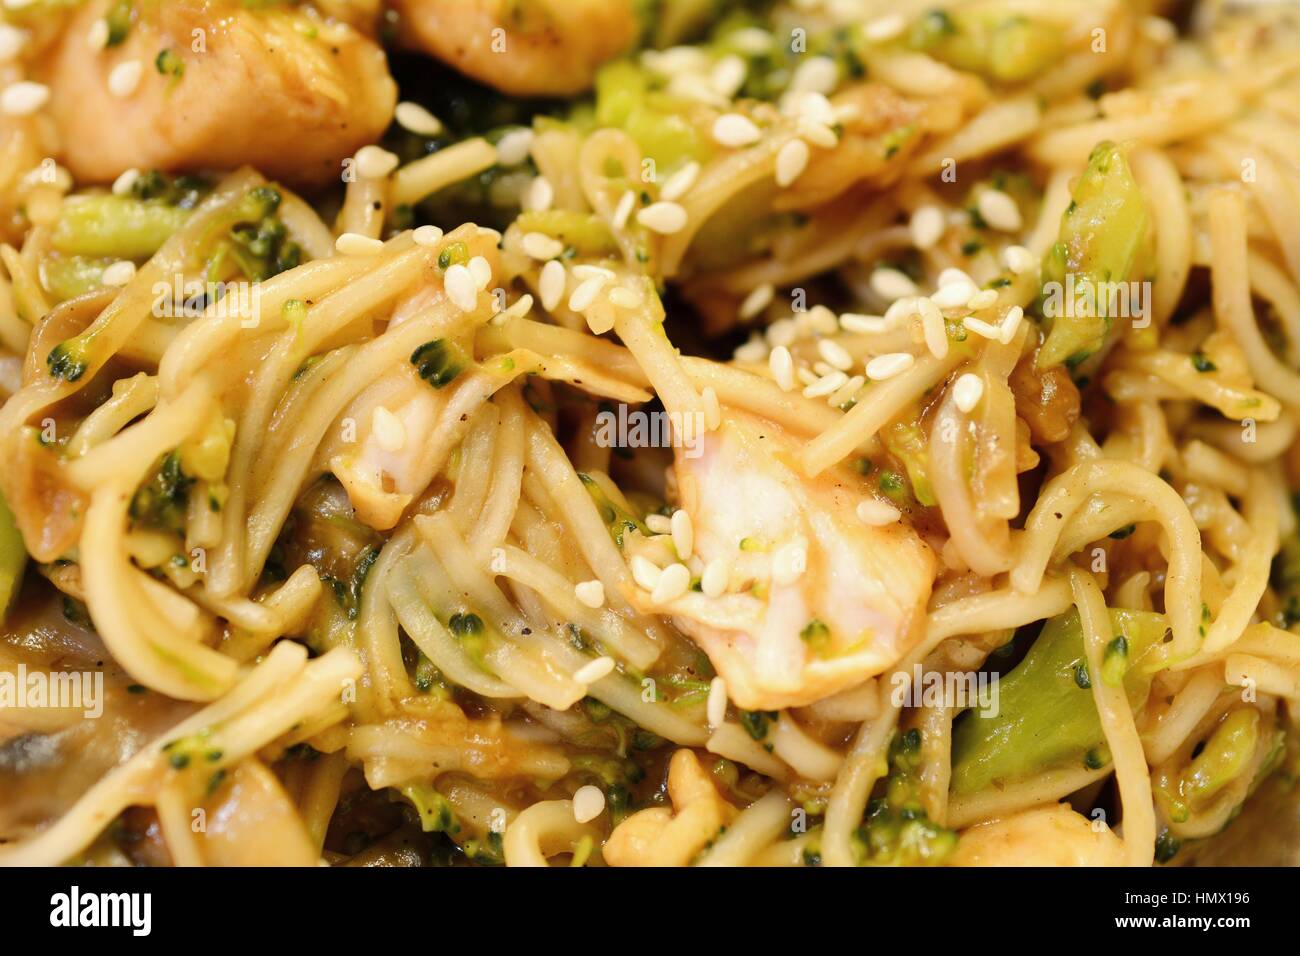 Chinese noodles with chicken meat, broccoli and vegetables. Stock Photo